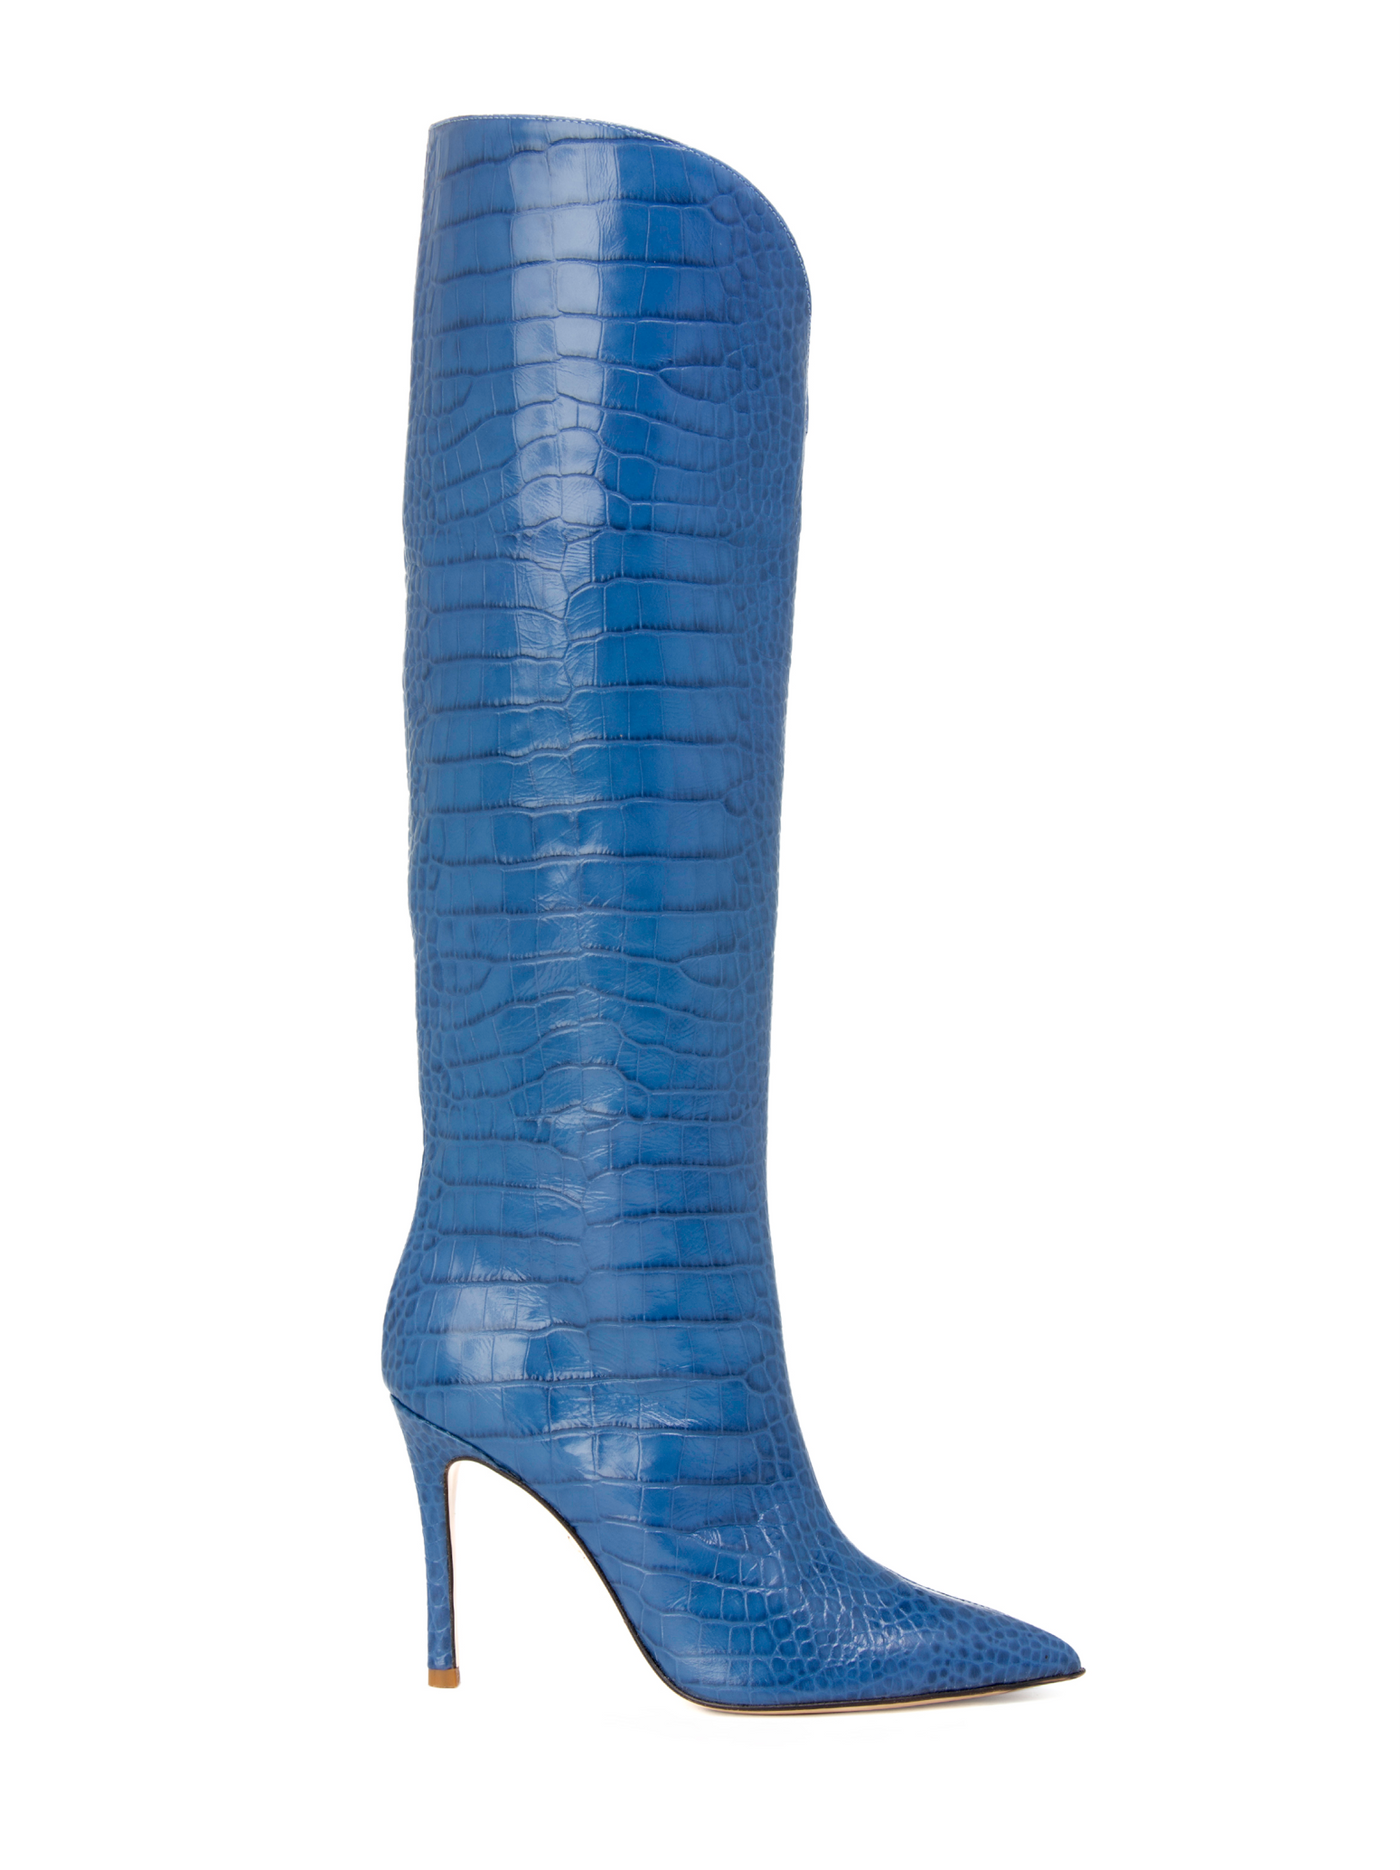 Peyton Blue Embossed Leather Boot